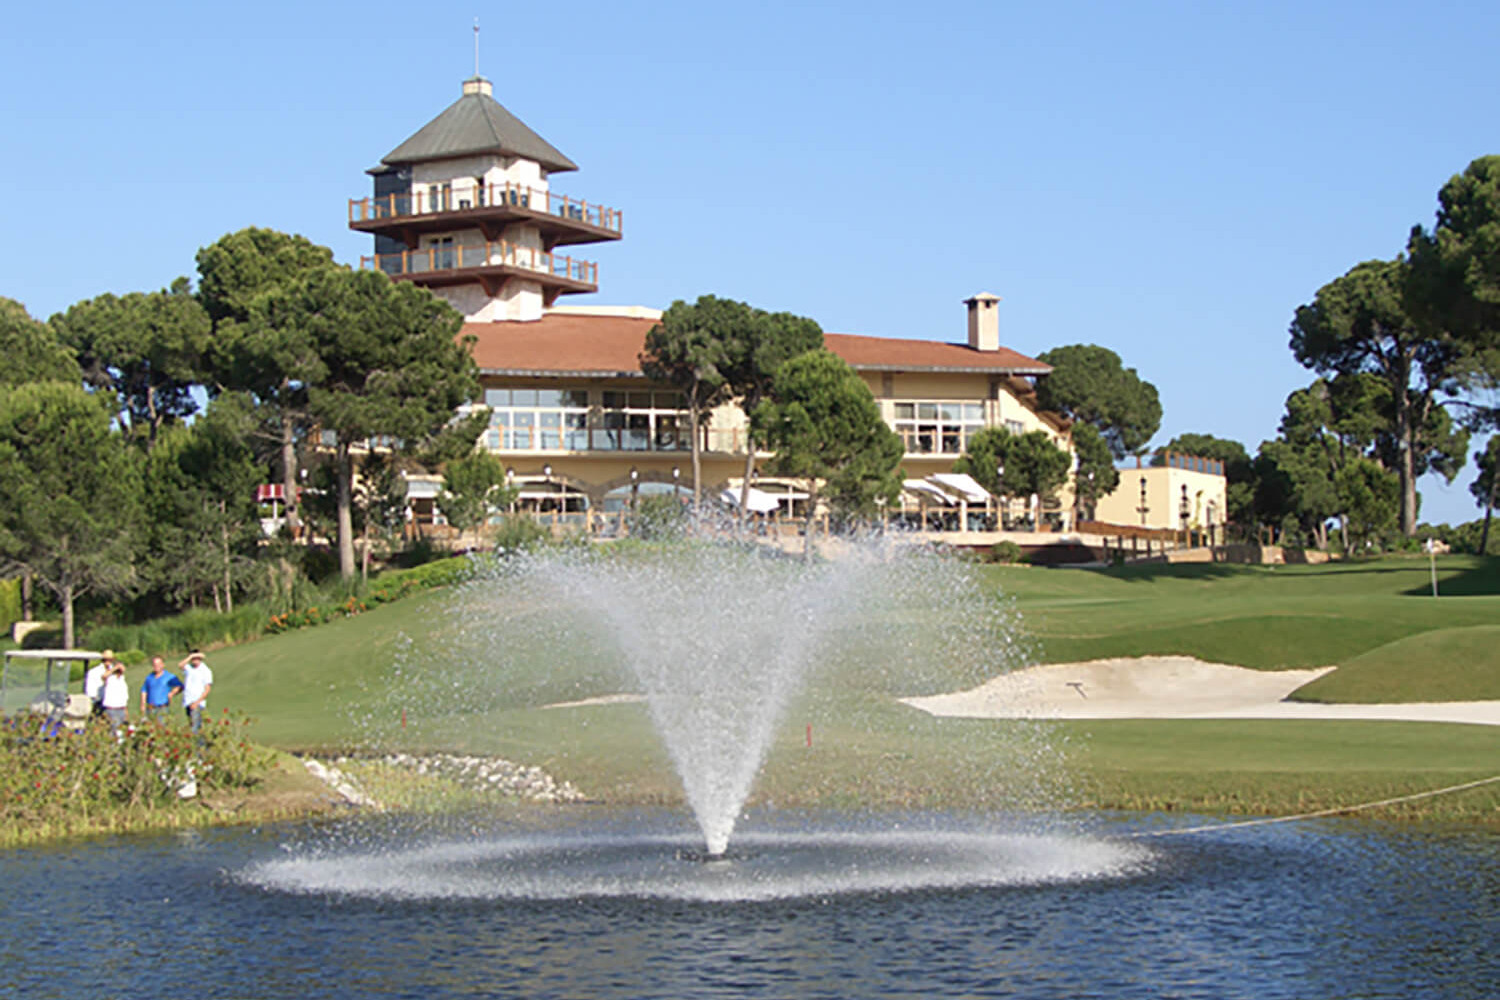 One of Otterbine's Aerating Fountains at a golf course